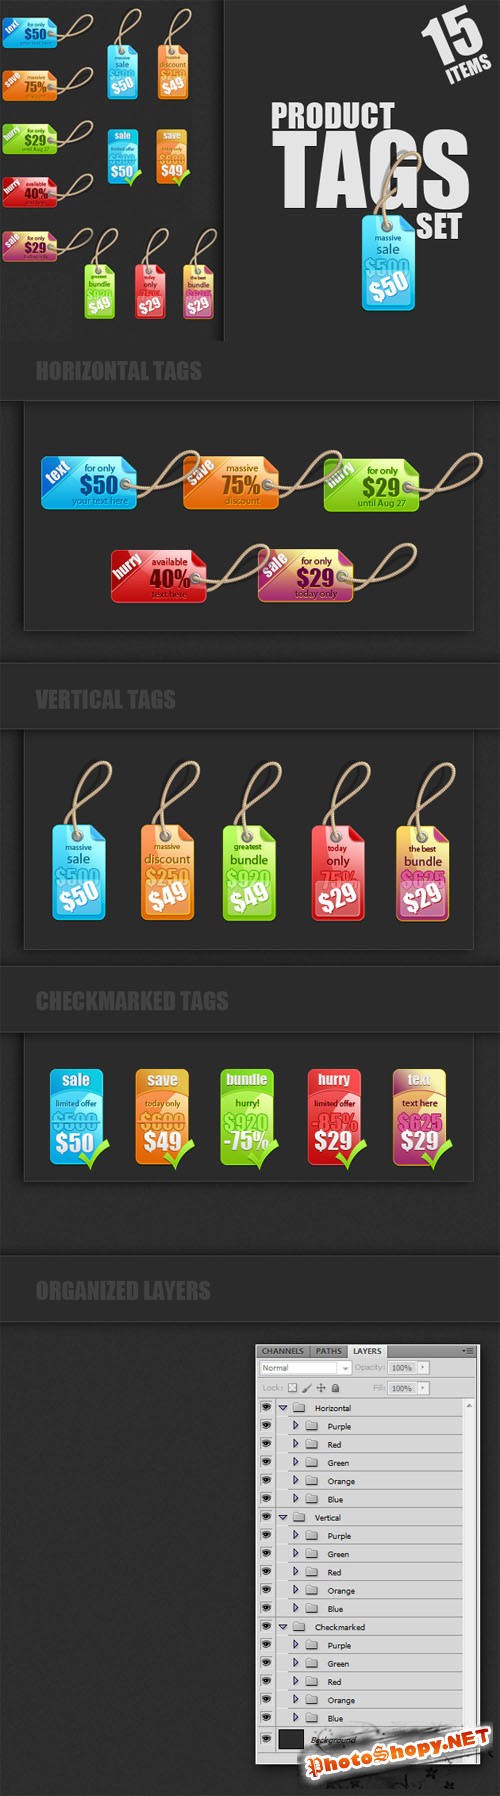 Designtnt - Product Tags for Photoshop